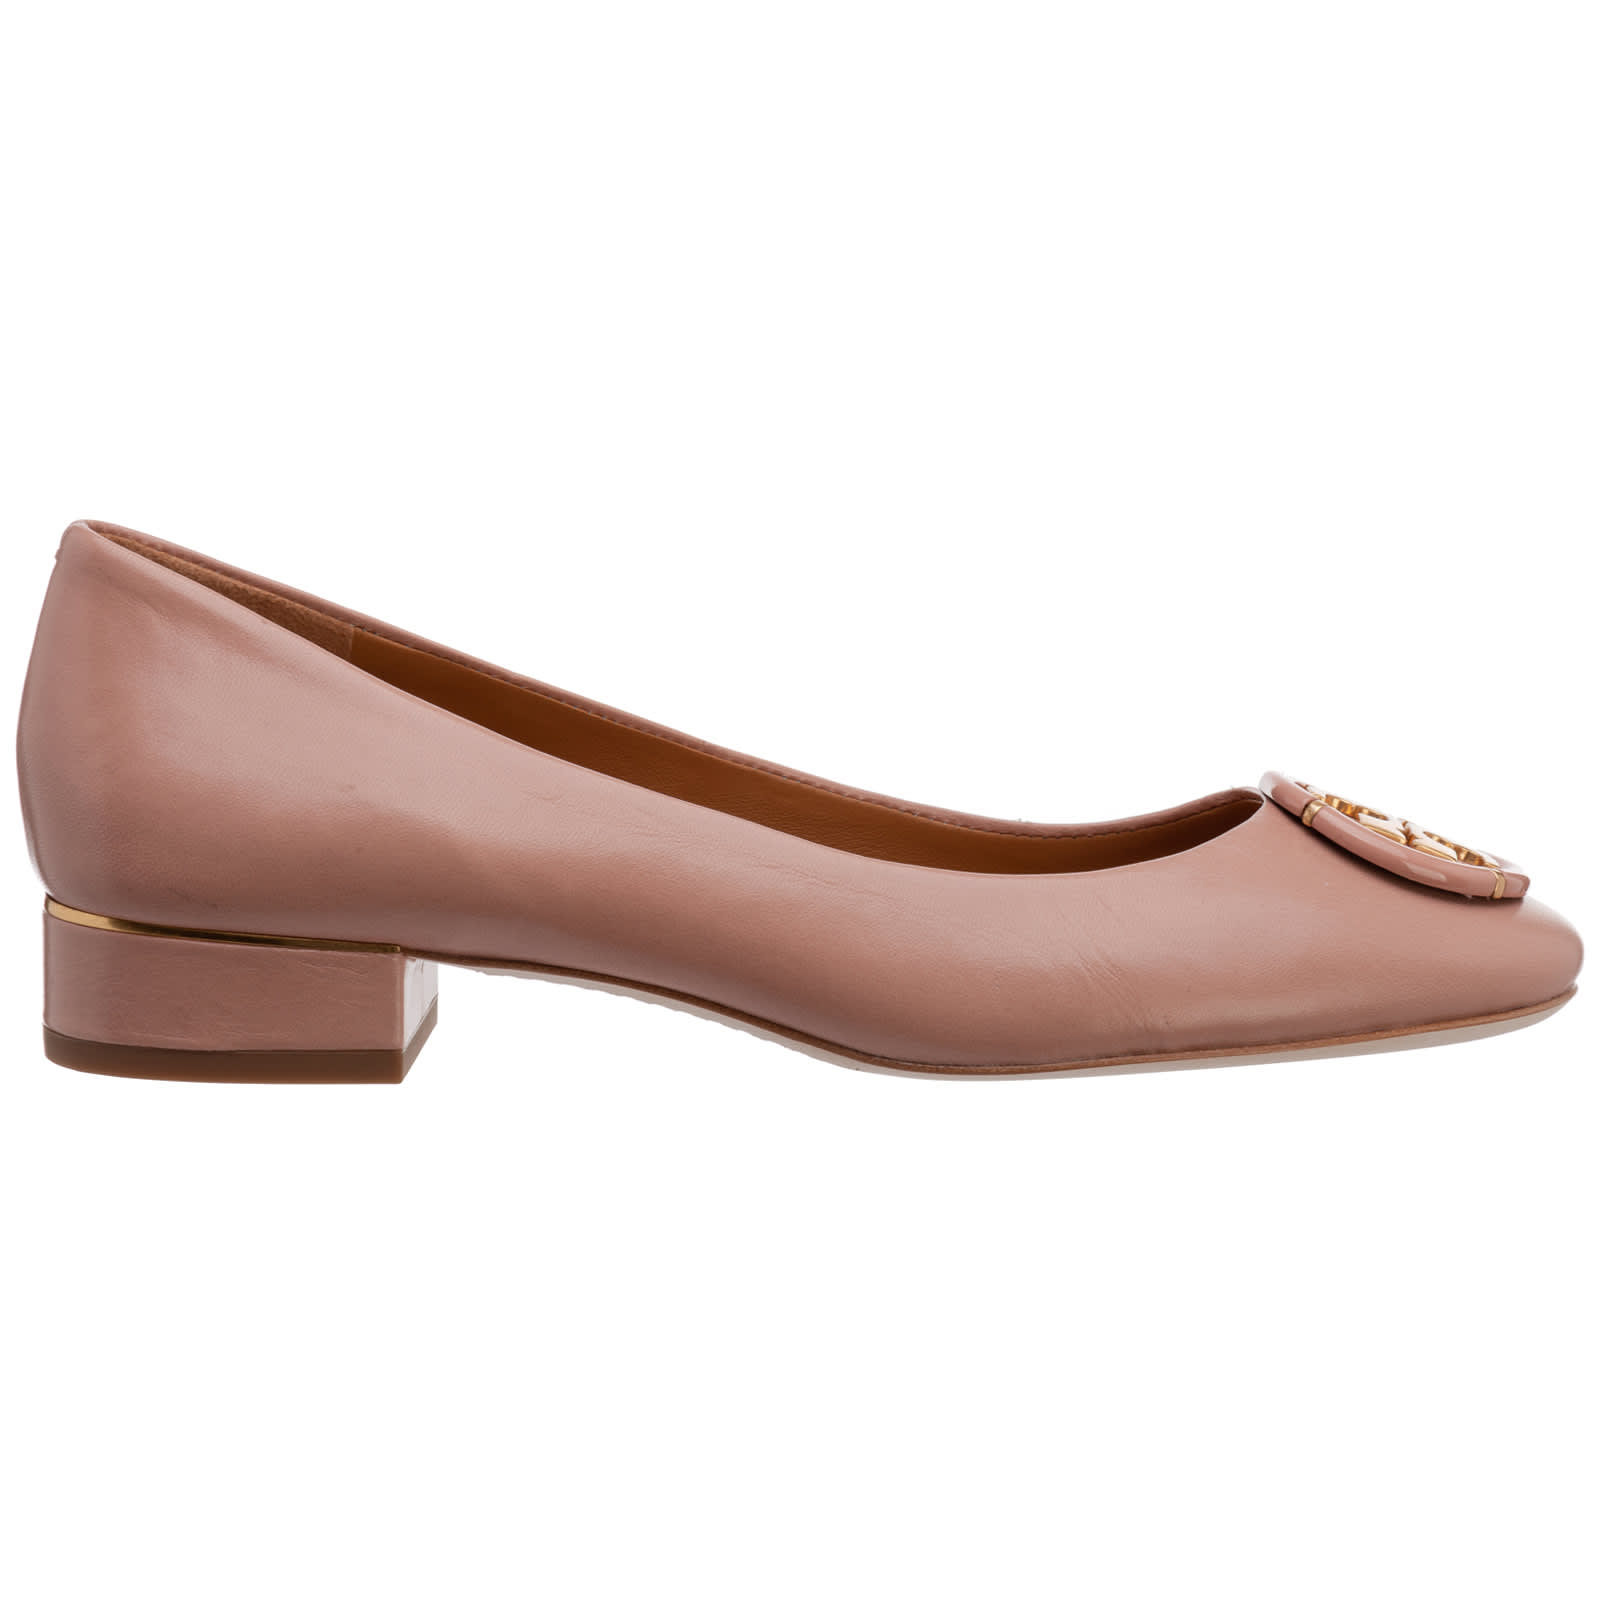 Buy Tory Burch Ace Ballet Pumps online, shop Tory Burch shoes with free shipping